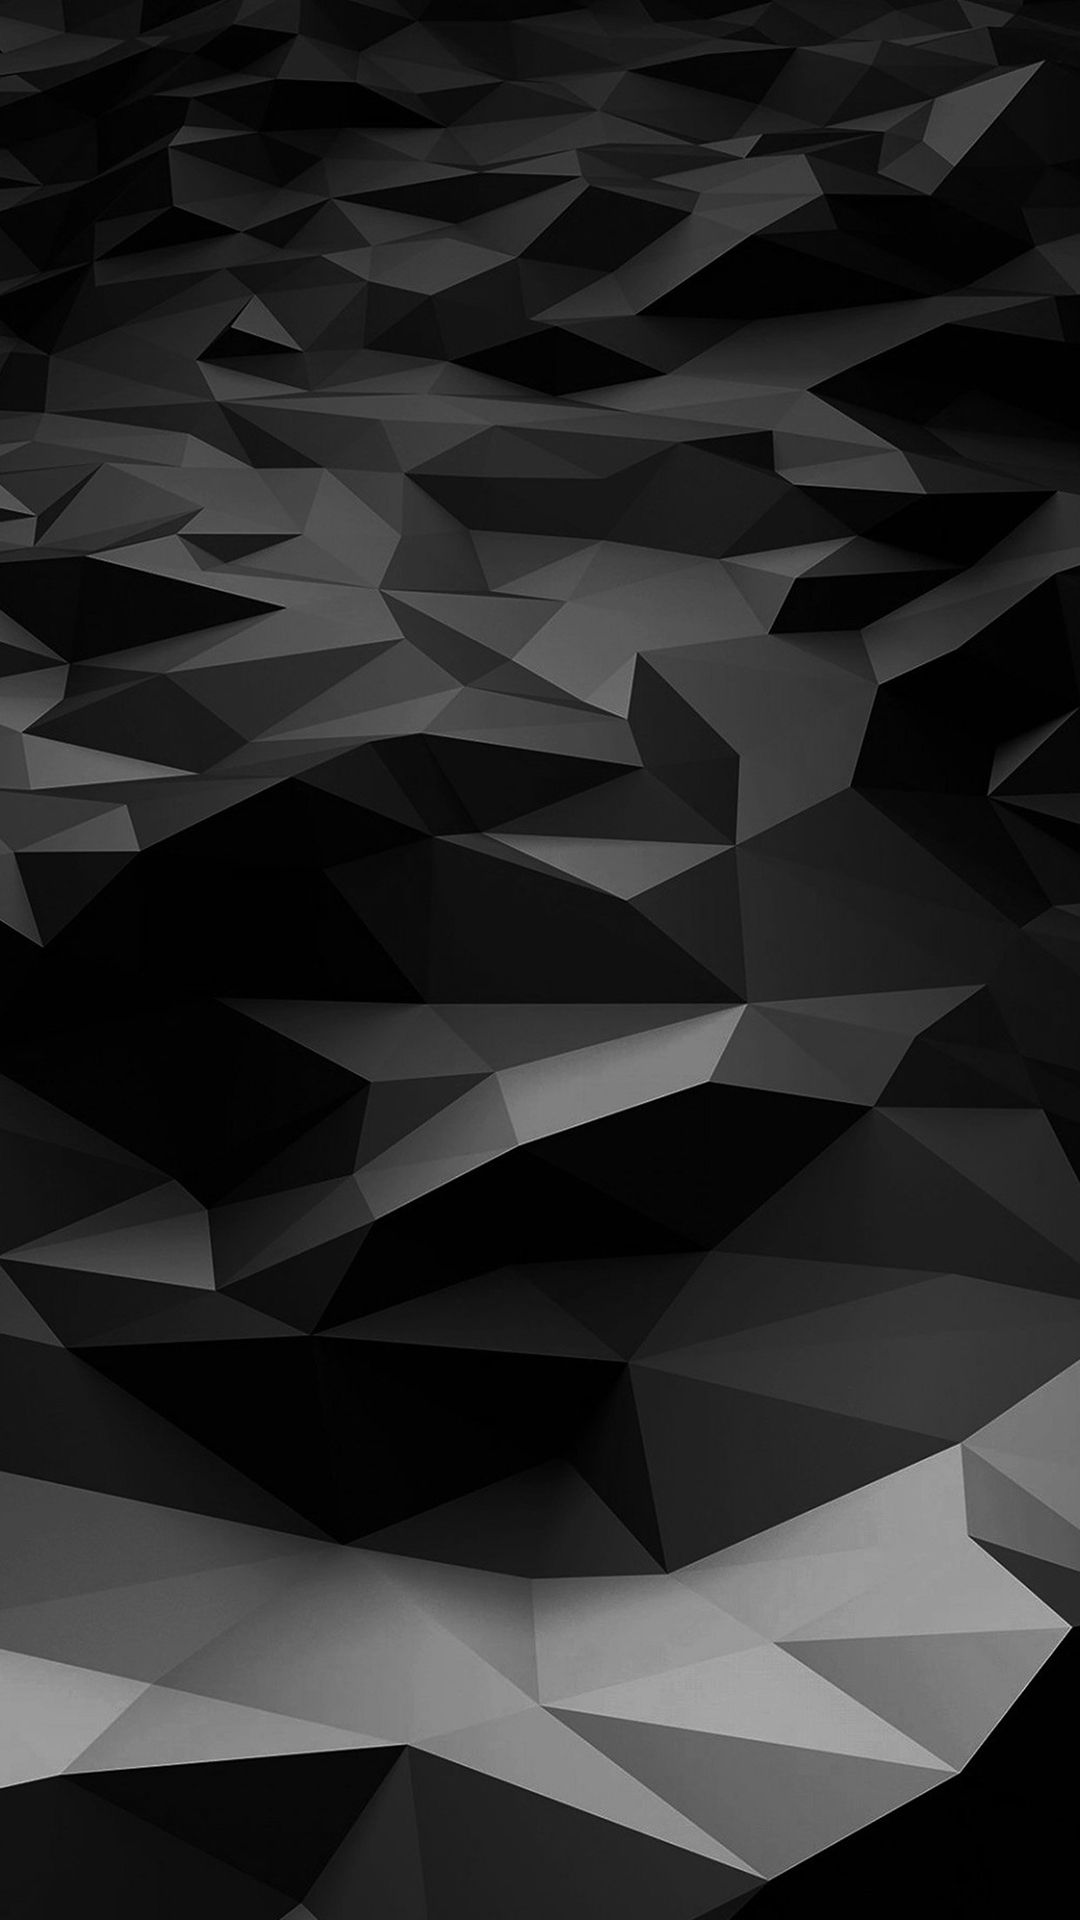 Black and white abstract wallpaper for your iPhone from the 2560x1440 - Low poly